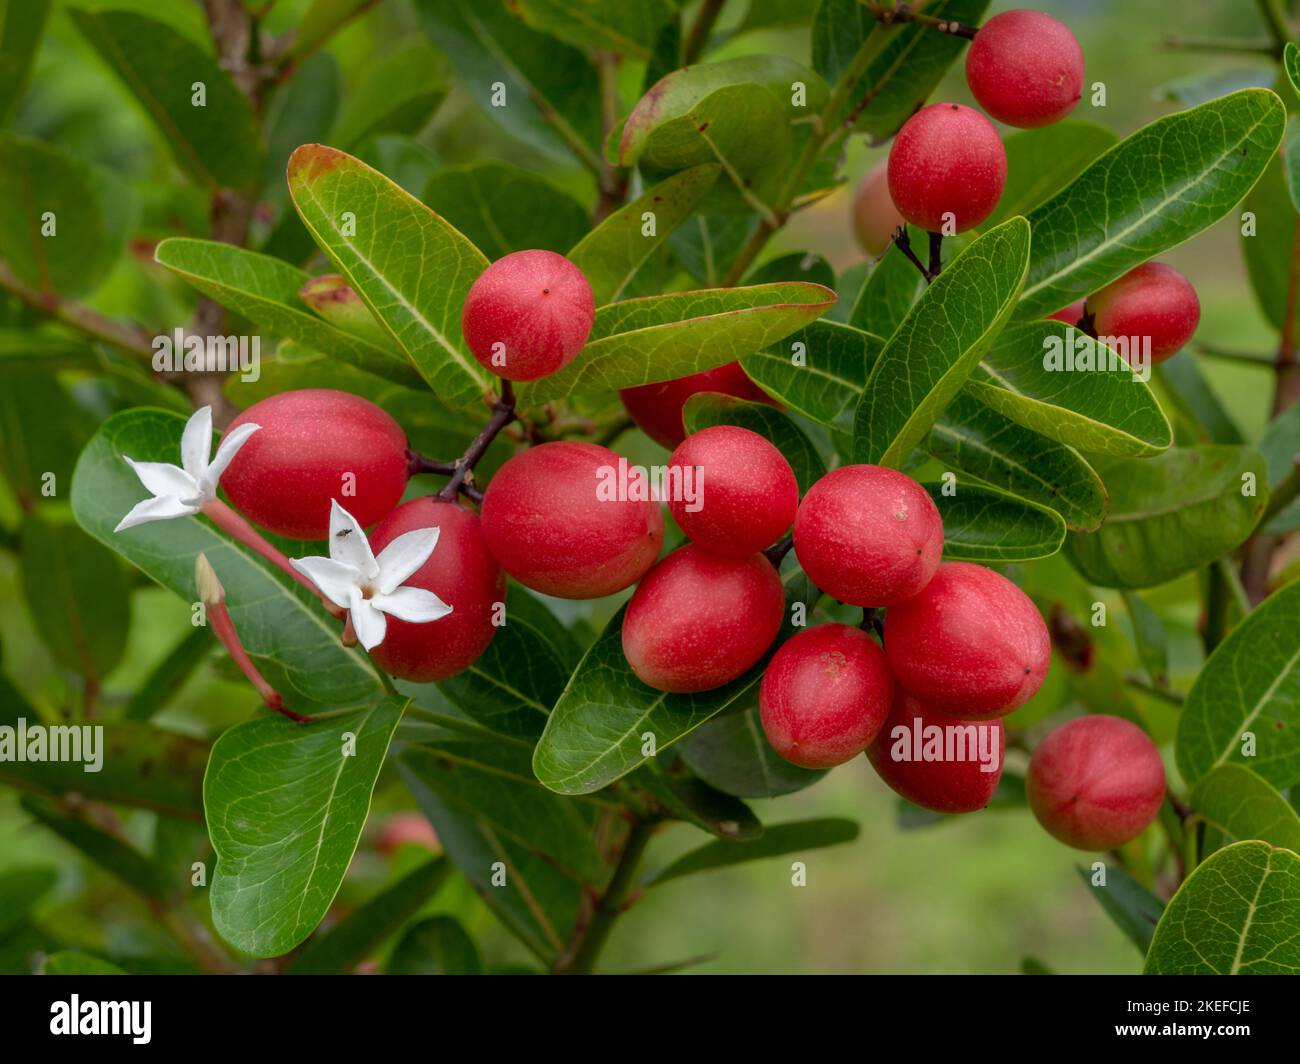 Closeup view of colorful red berries and white flowers of tropical shrub carissa carandas aka Bengal currant or carandas plum in outdoor garden Stock Photo